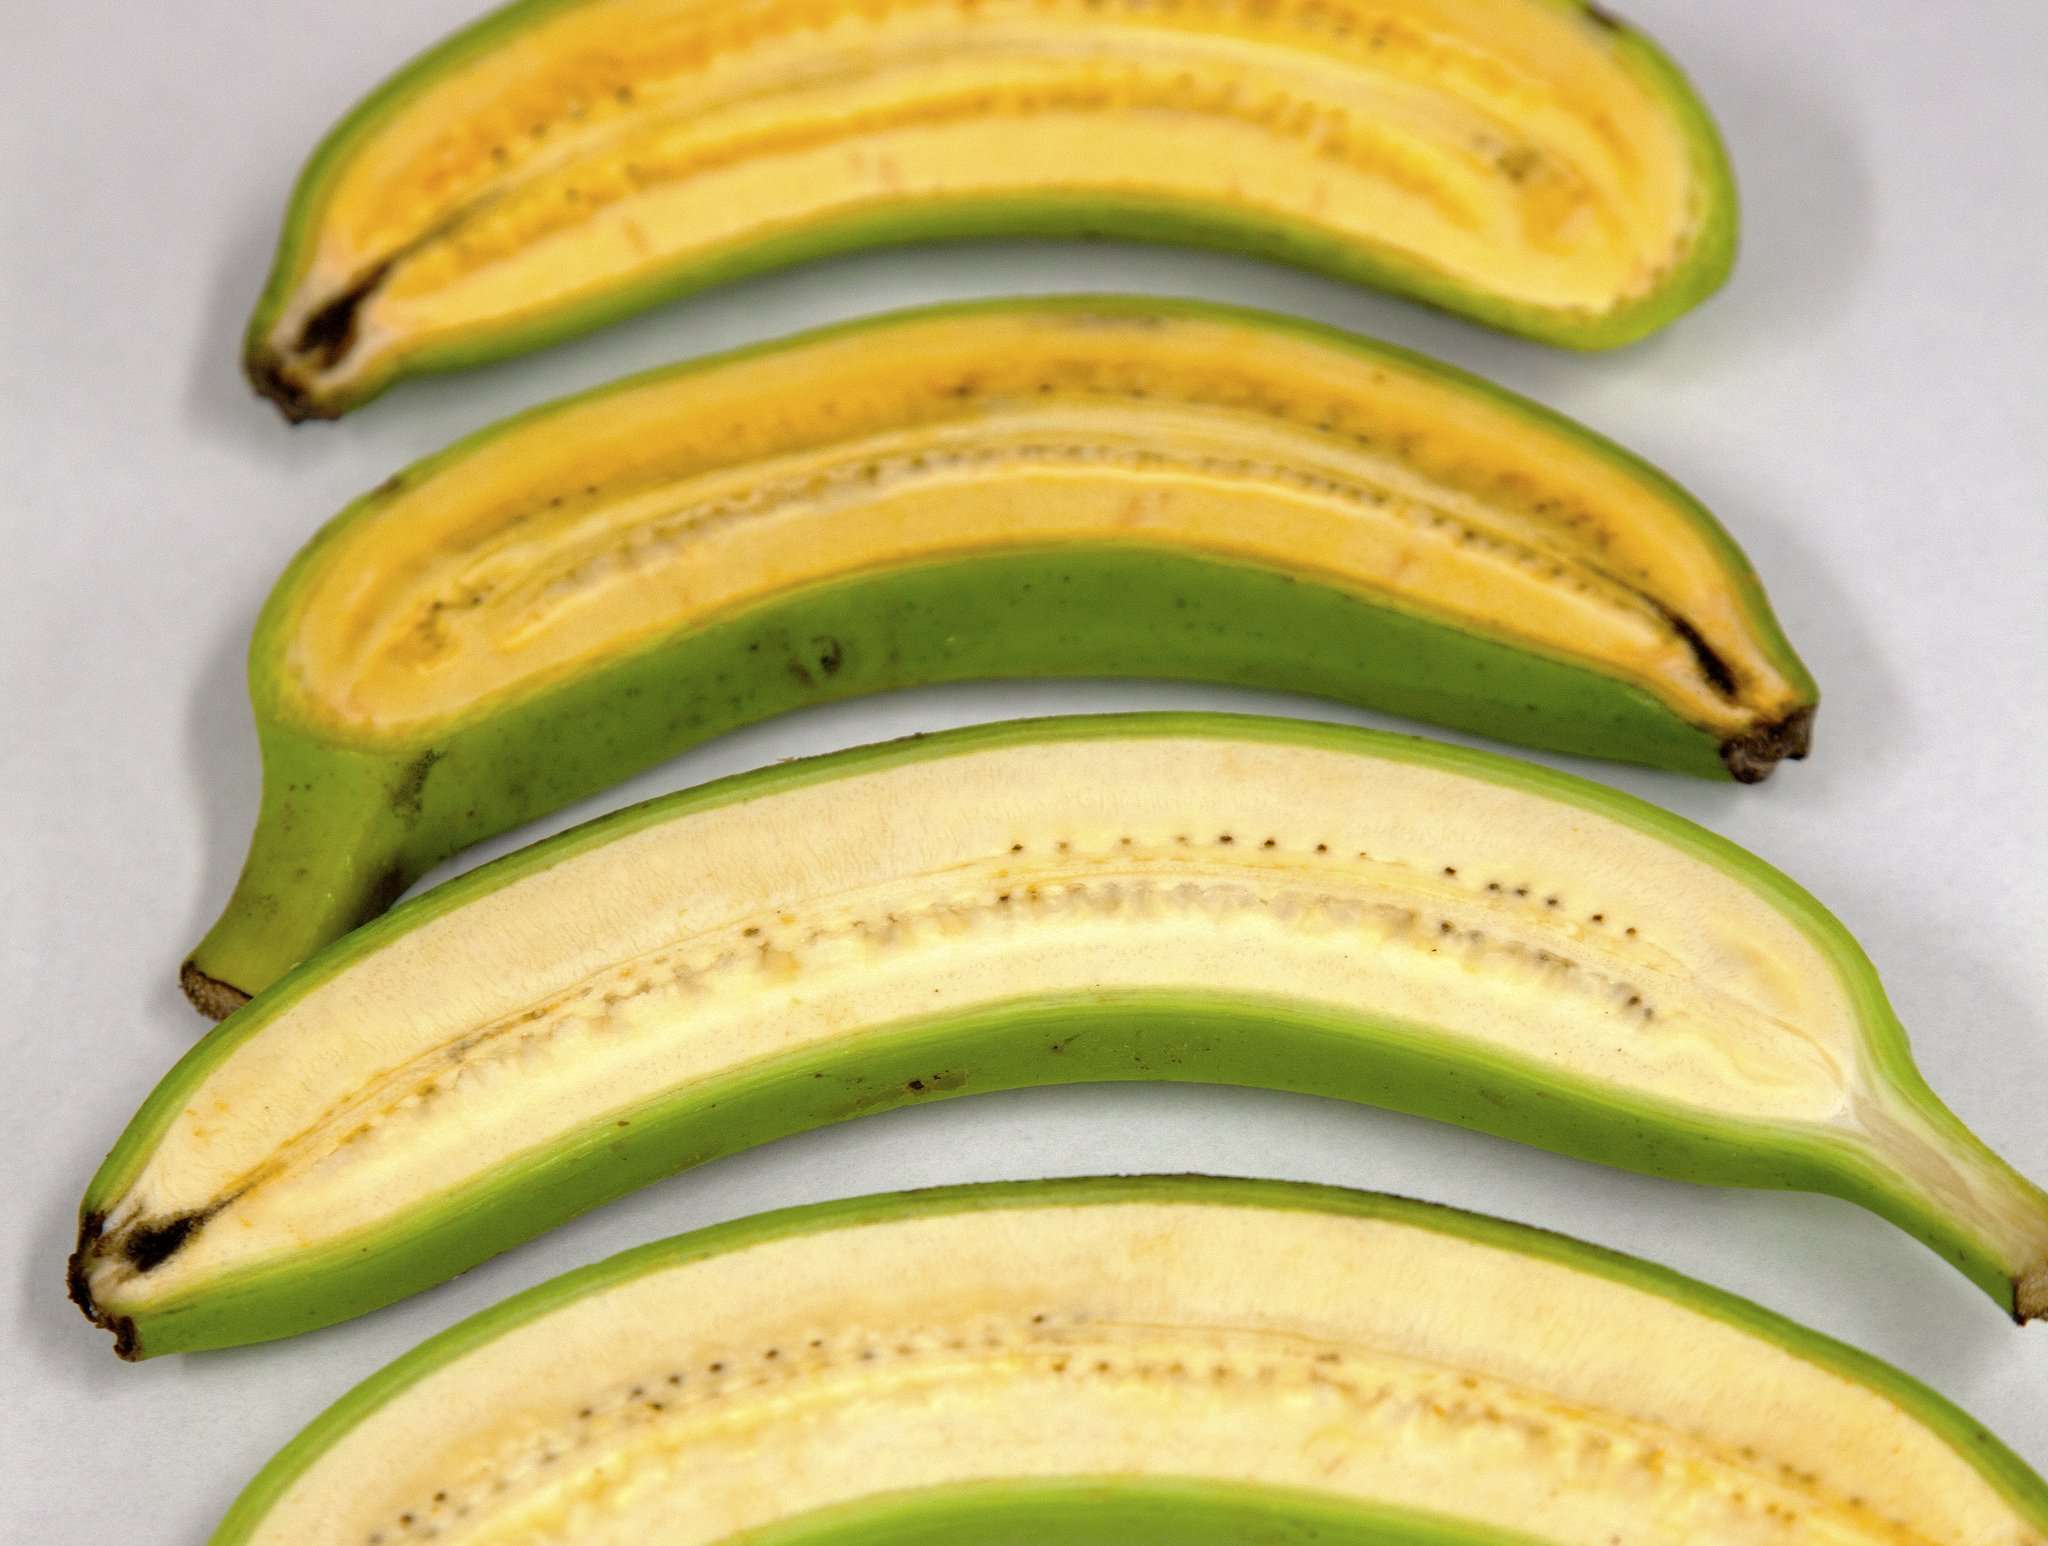 image for Bananas: Scientists Create Vitamin A-Rich Fruit That Could Save Hundreds of Thousands of Children’s Lives